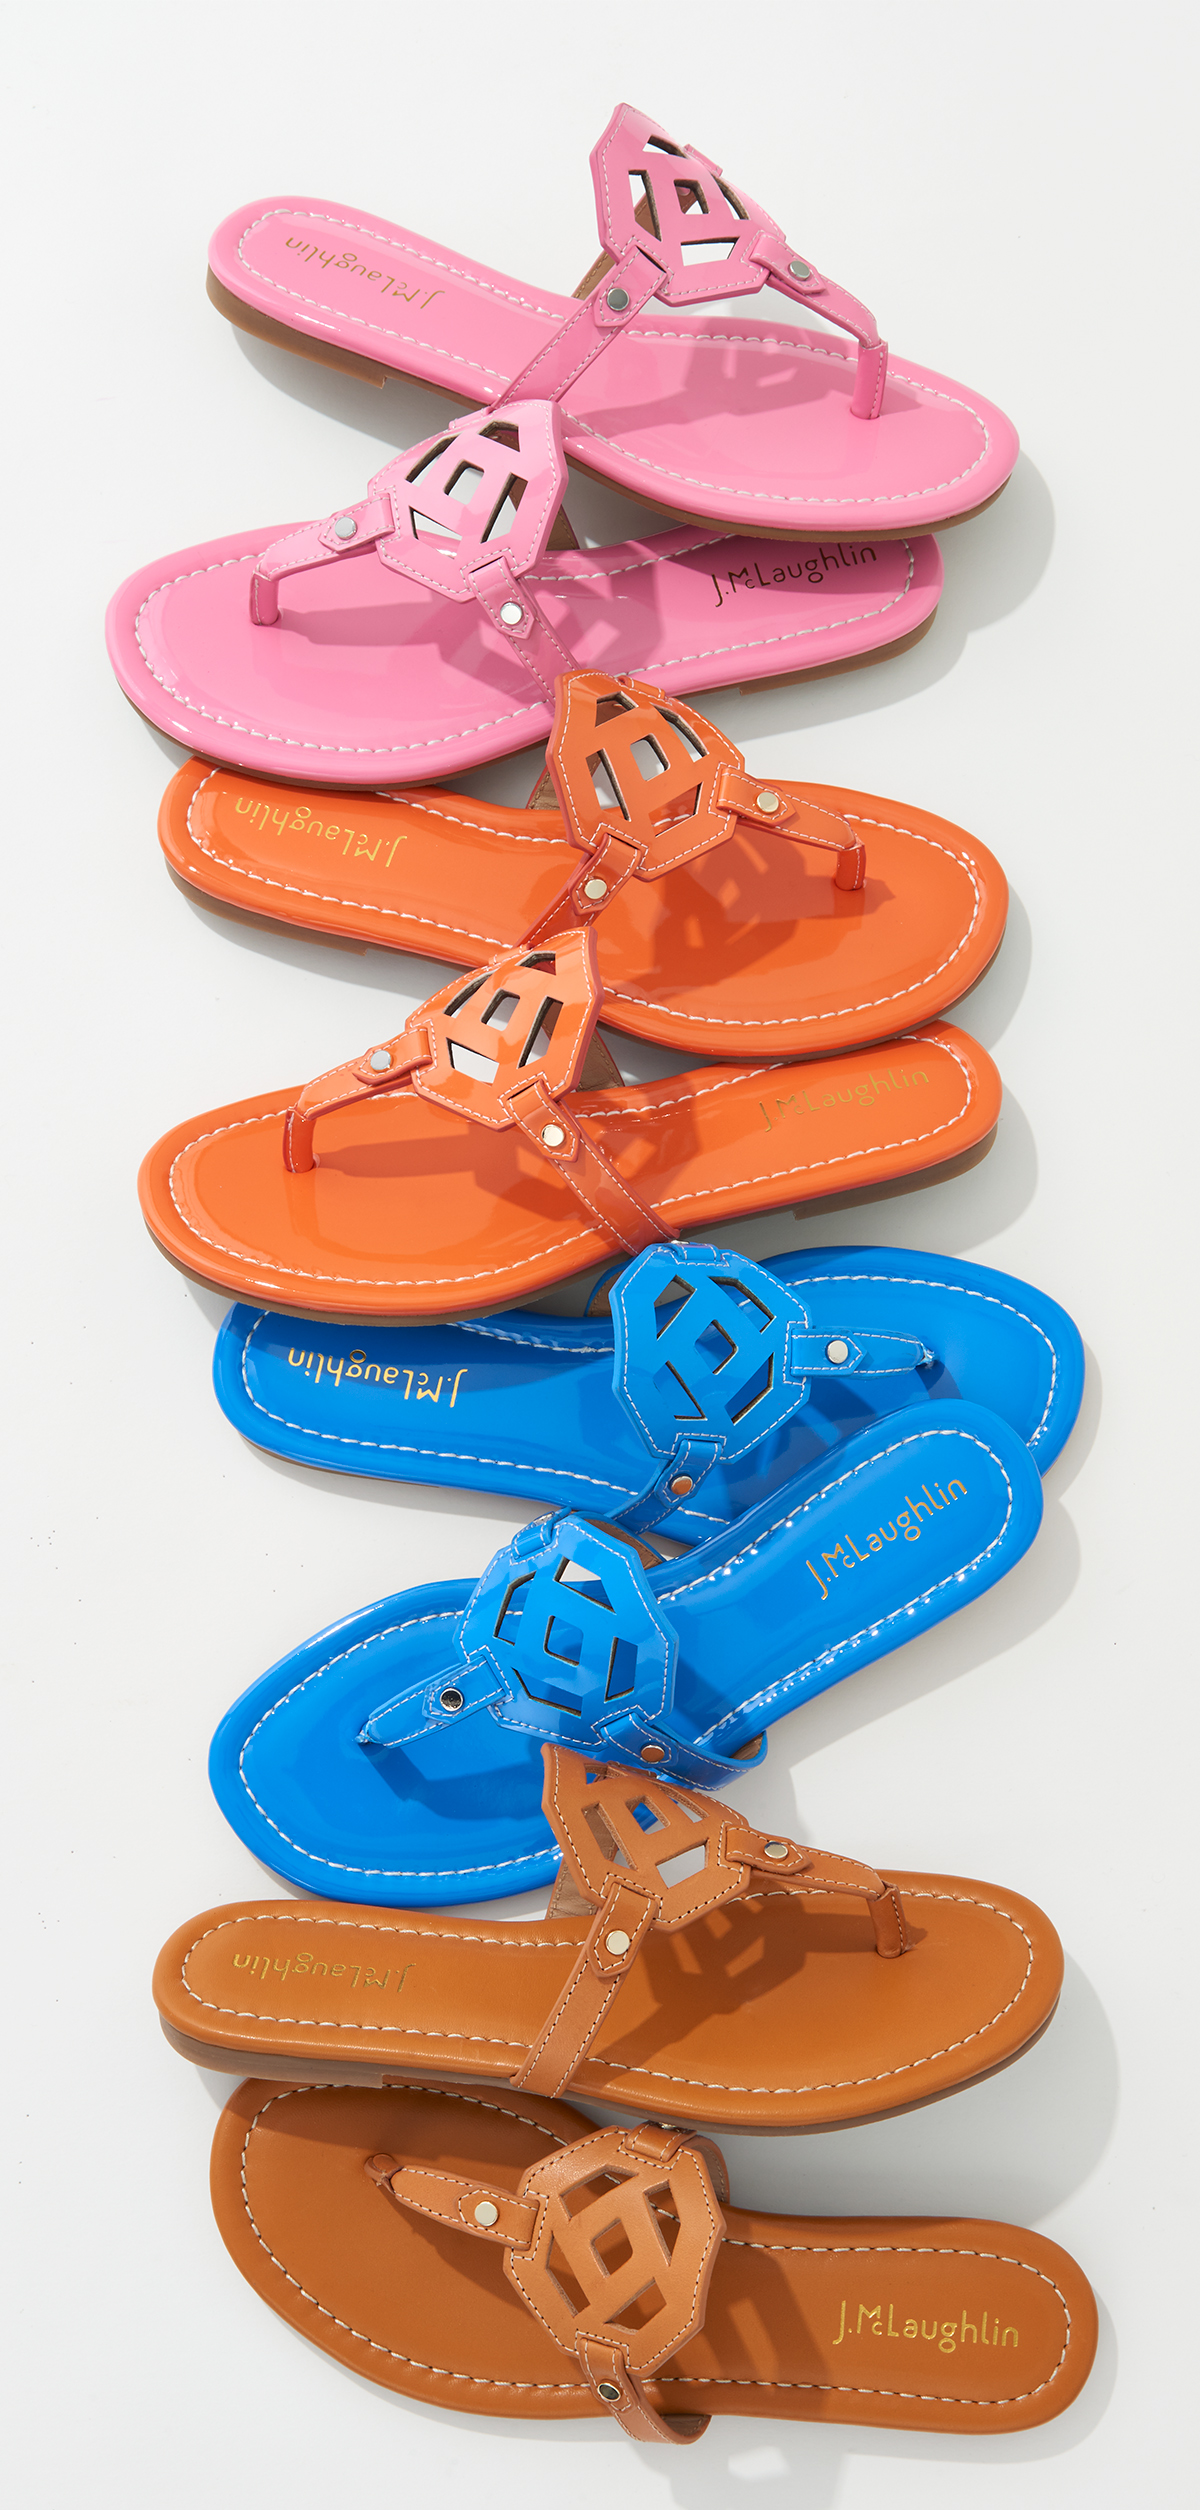  colorful sandals on white background by Alison Gootee Photography 